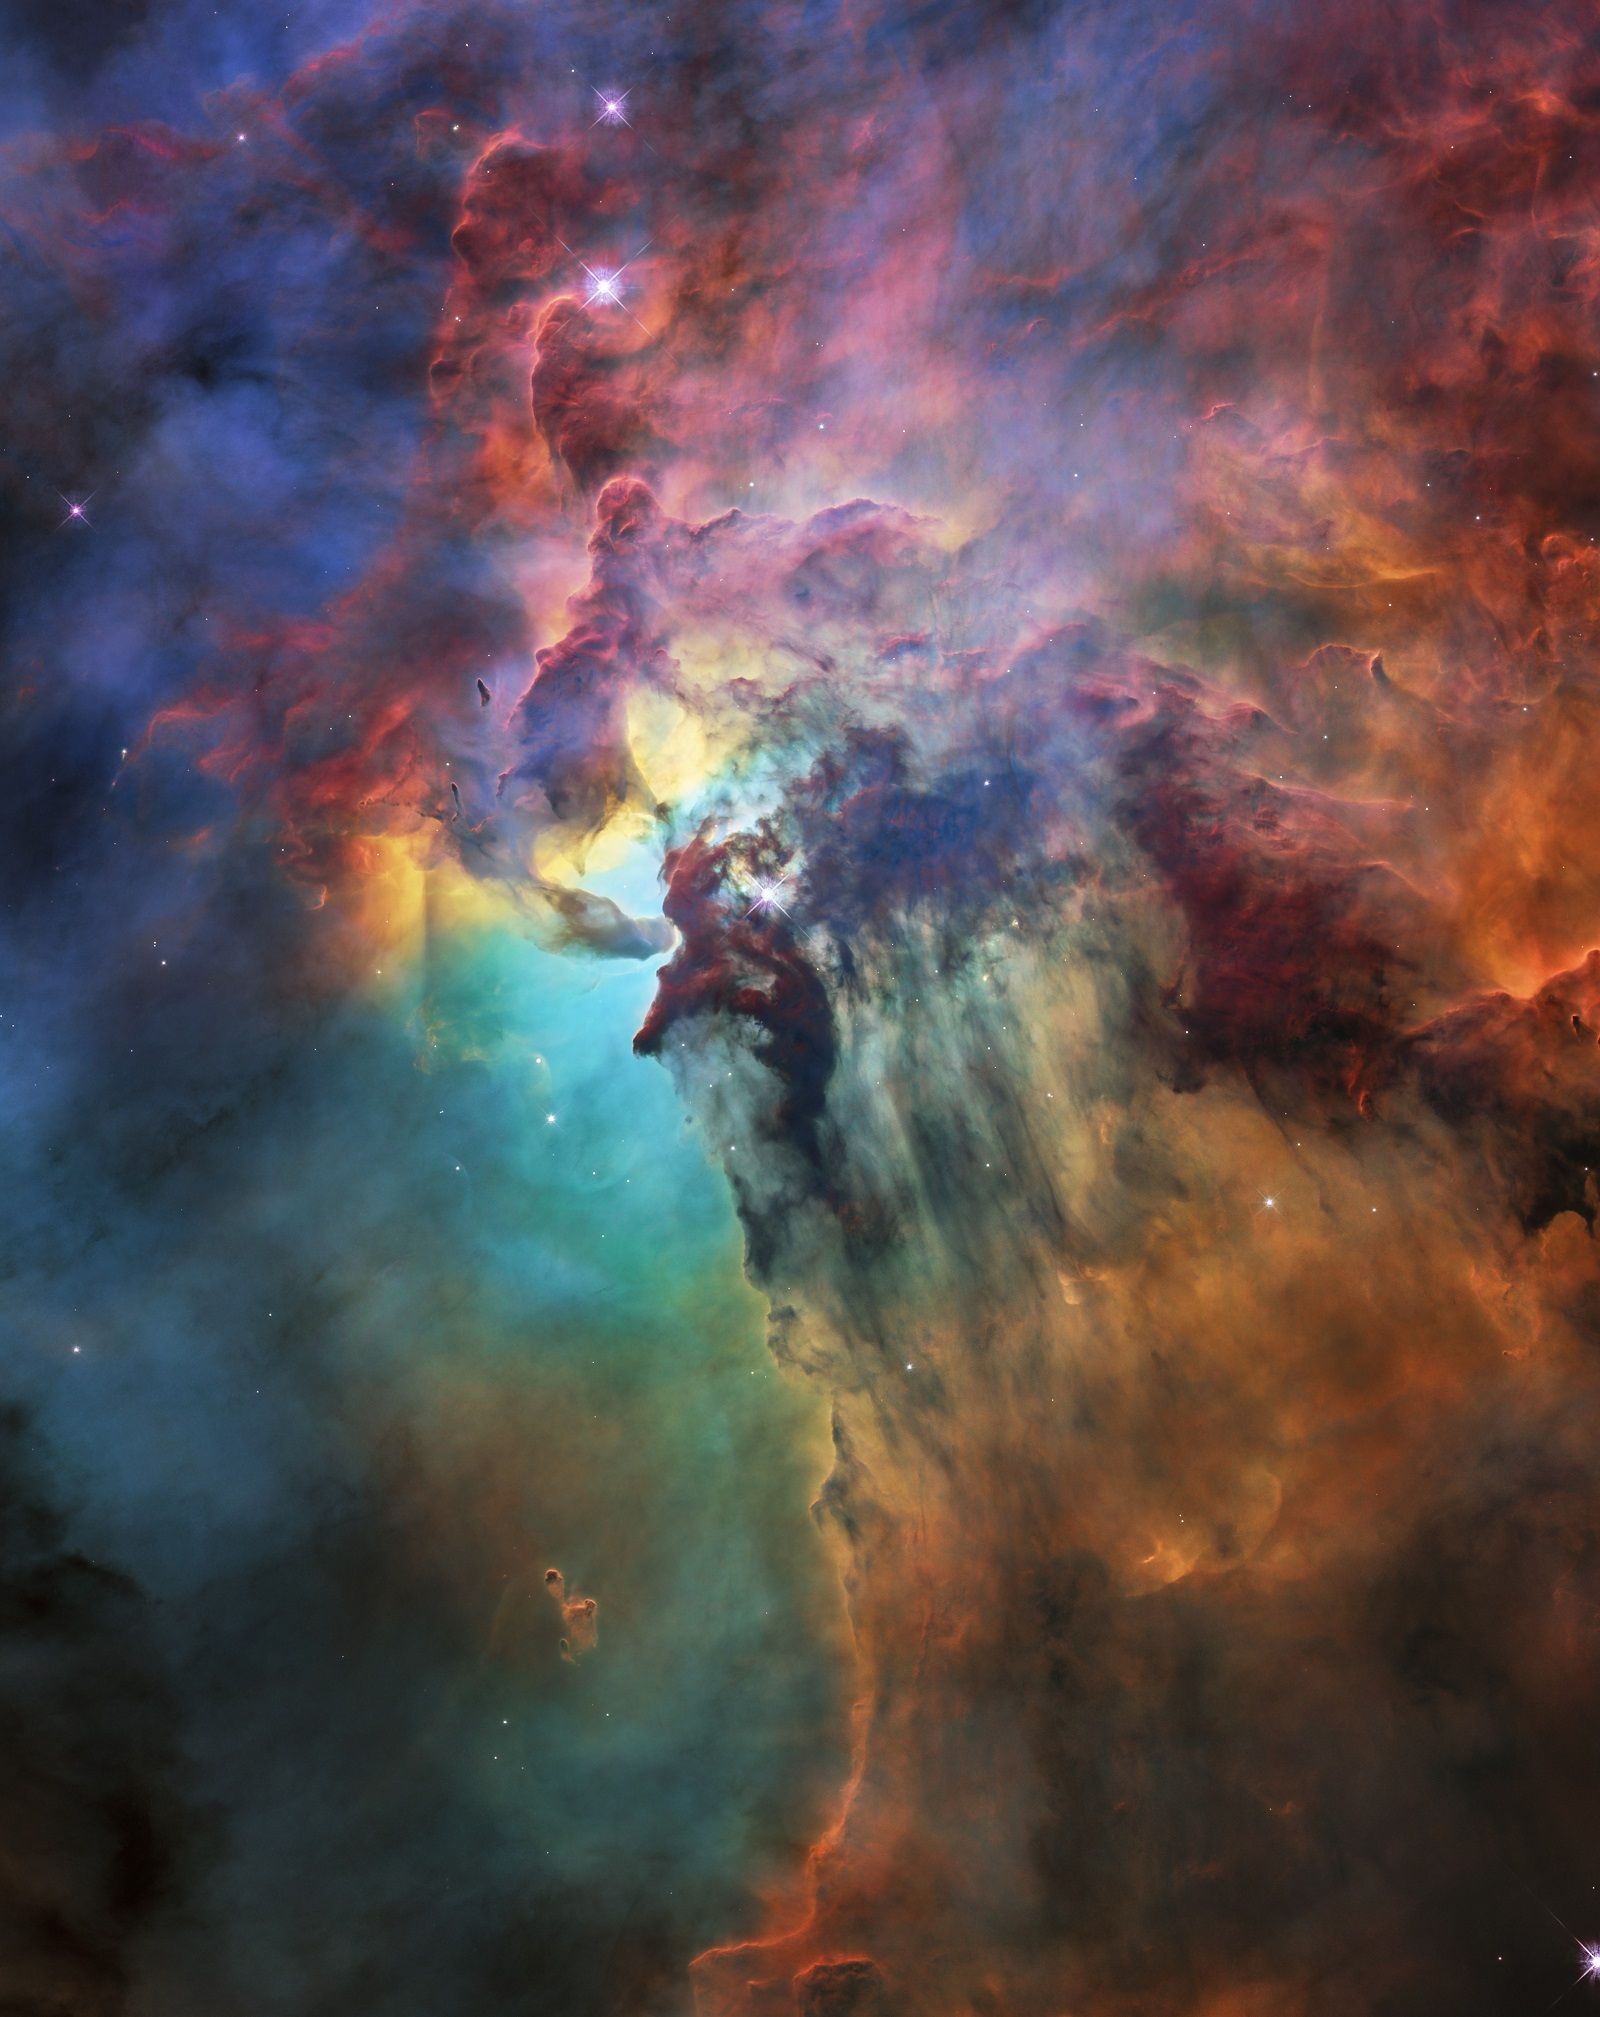 Astounding images from the depths of the Universe courtesy of the Hubble Space Telescope image 11